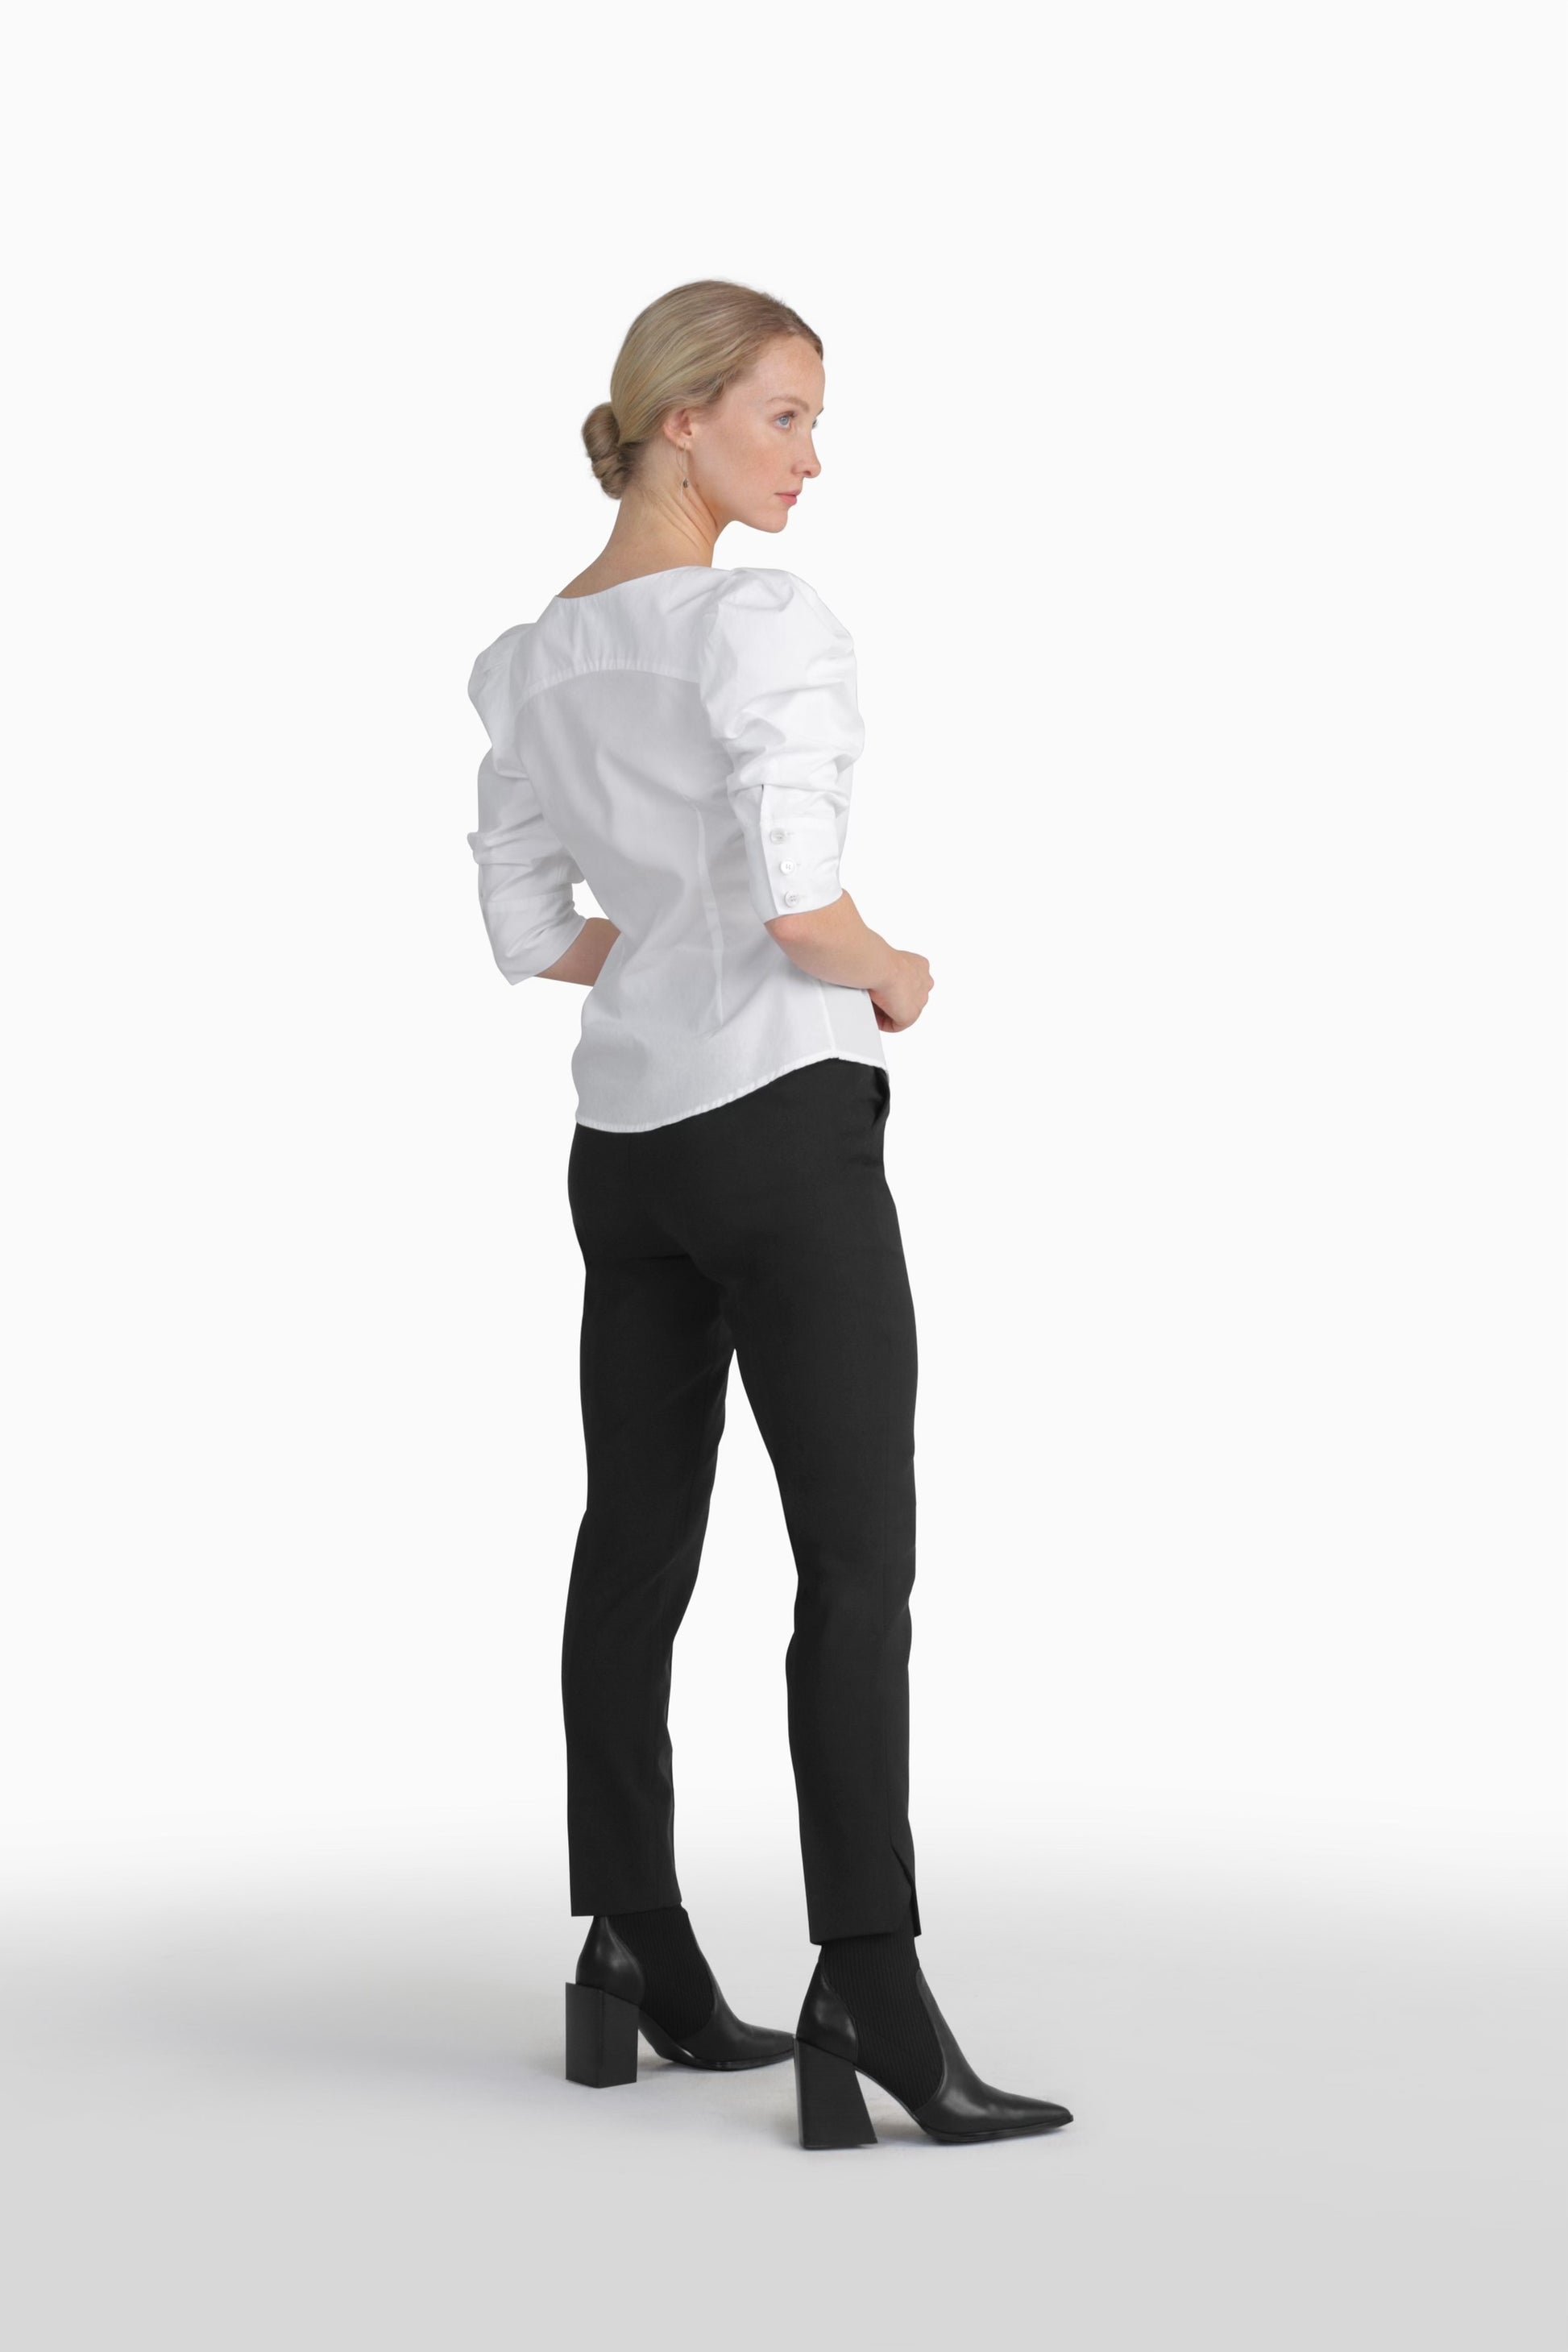 Seragyi's Martina Blouse in White, crafted from 100% eco-friendly cotton. Featuring an asymmetrical neckline and ruched sleeves, it's a versatile and elegant piece in Women's Clothing.